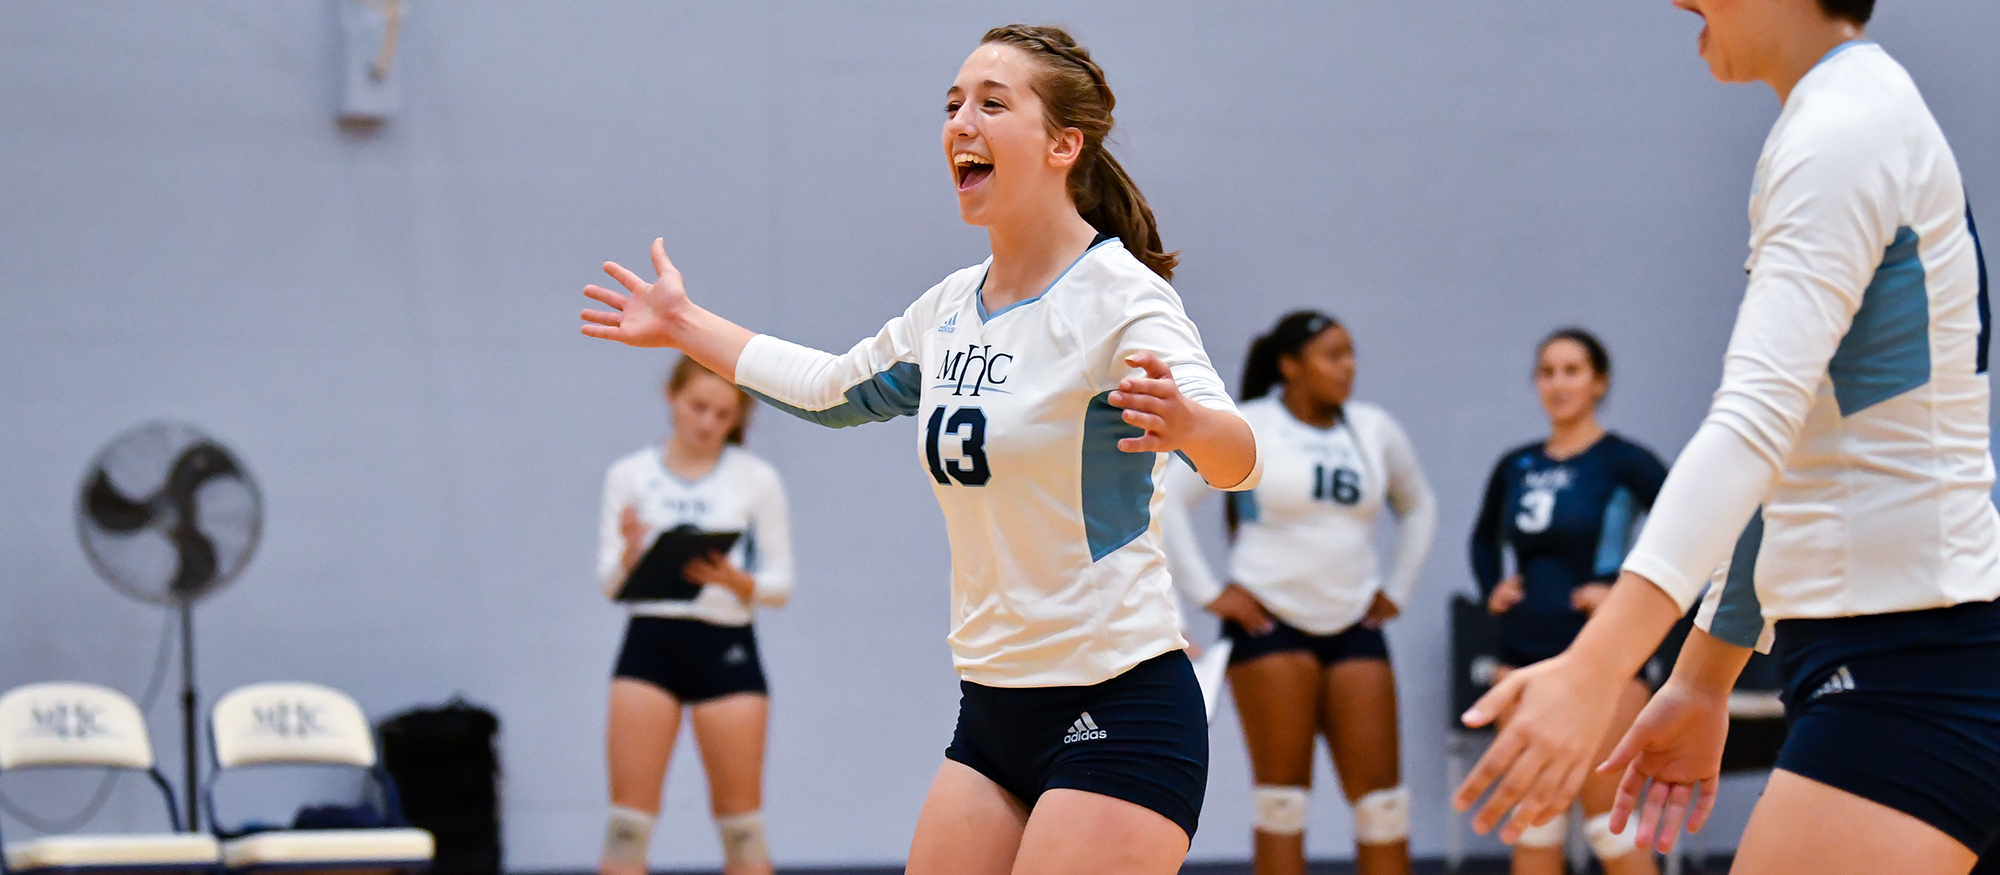 Bishop and Simon Lead Volleyball Past Husson; Lyons Fall to MIT in NEWMAC Play